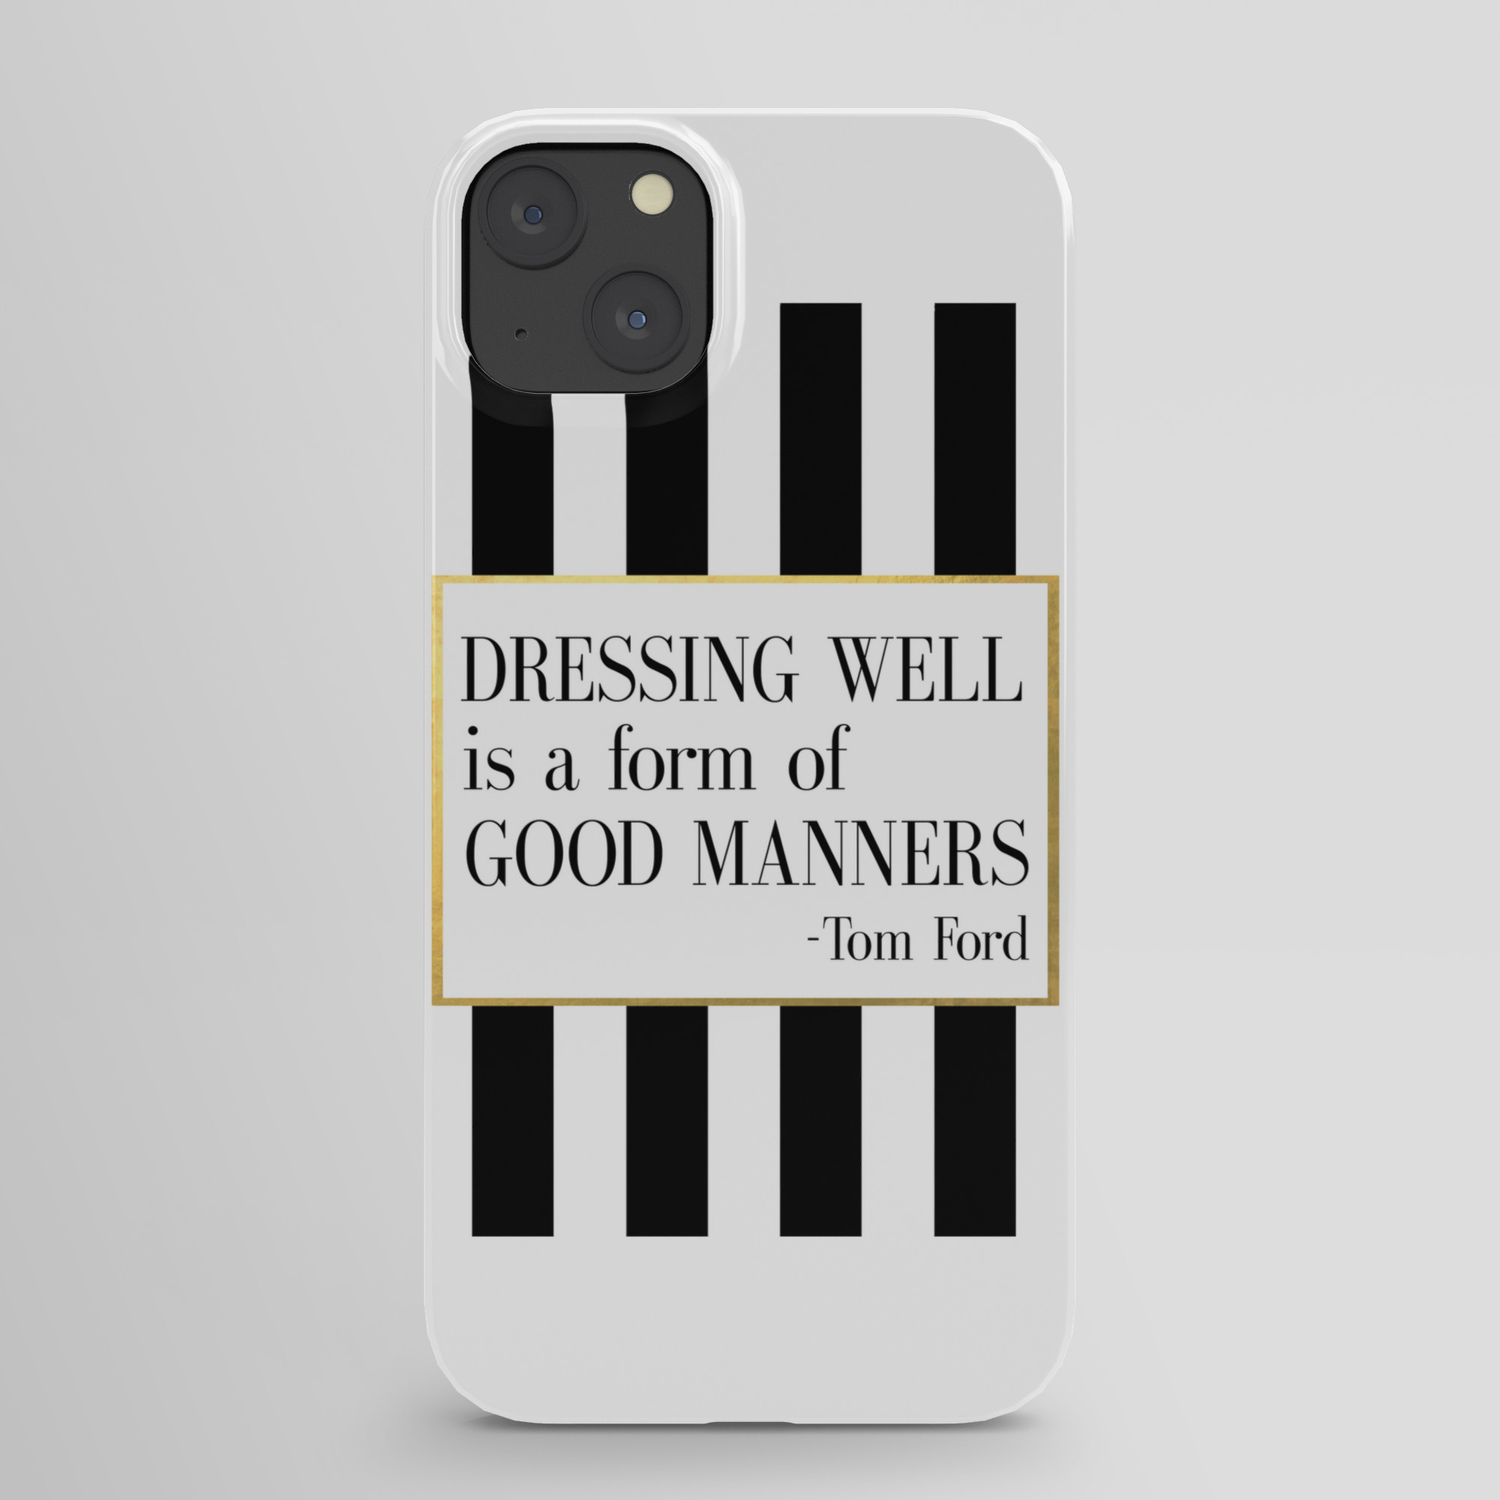 TOM FORD QUOTE Fashion Print Fashion Wall art Dressing Well is a form of  good manners Printable Art iPhone Case by TypoDesign | Society6